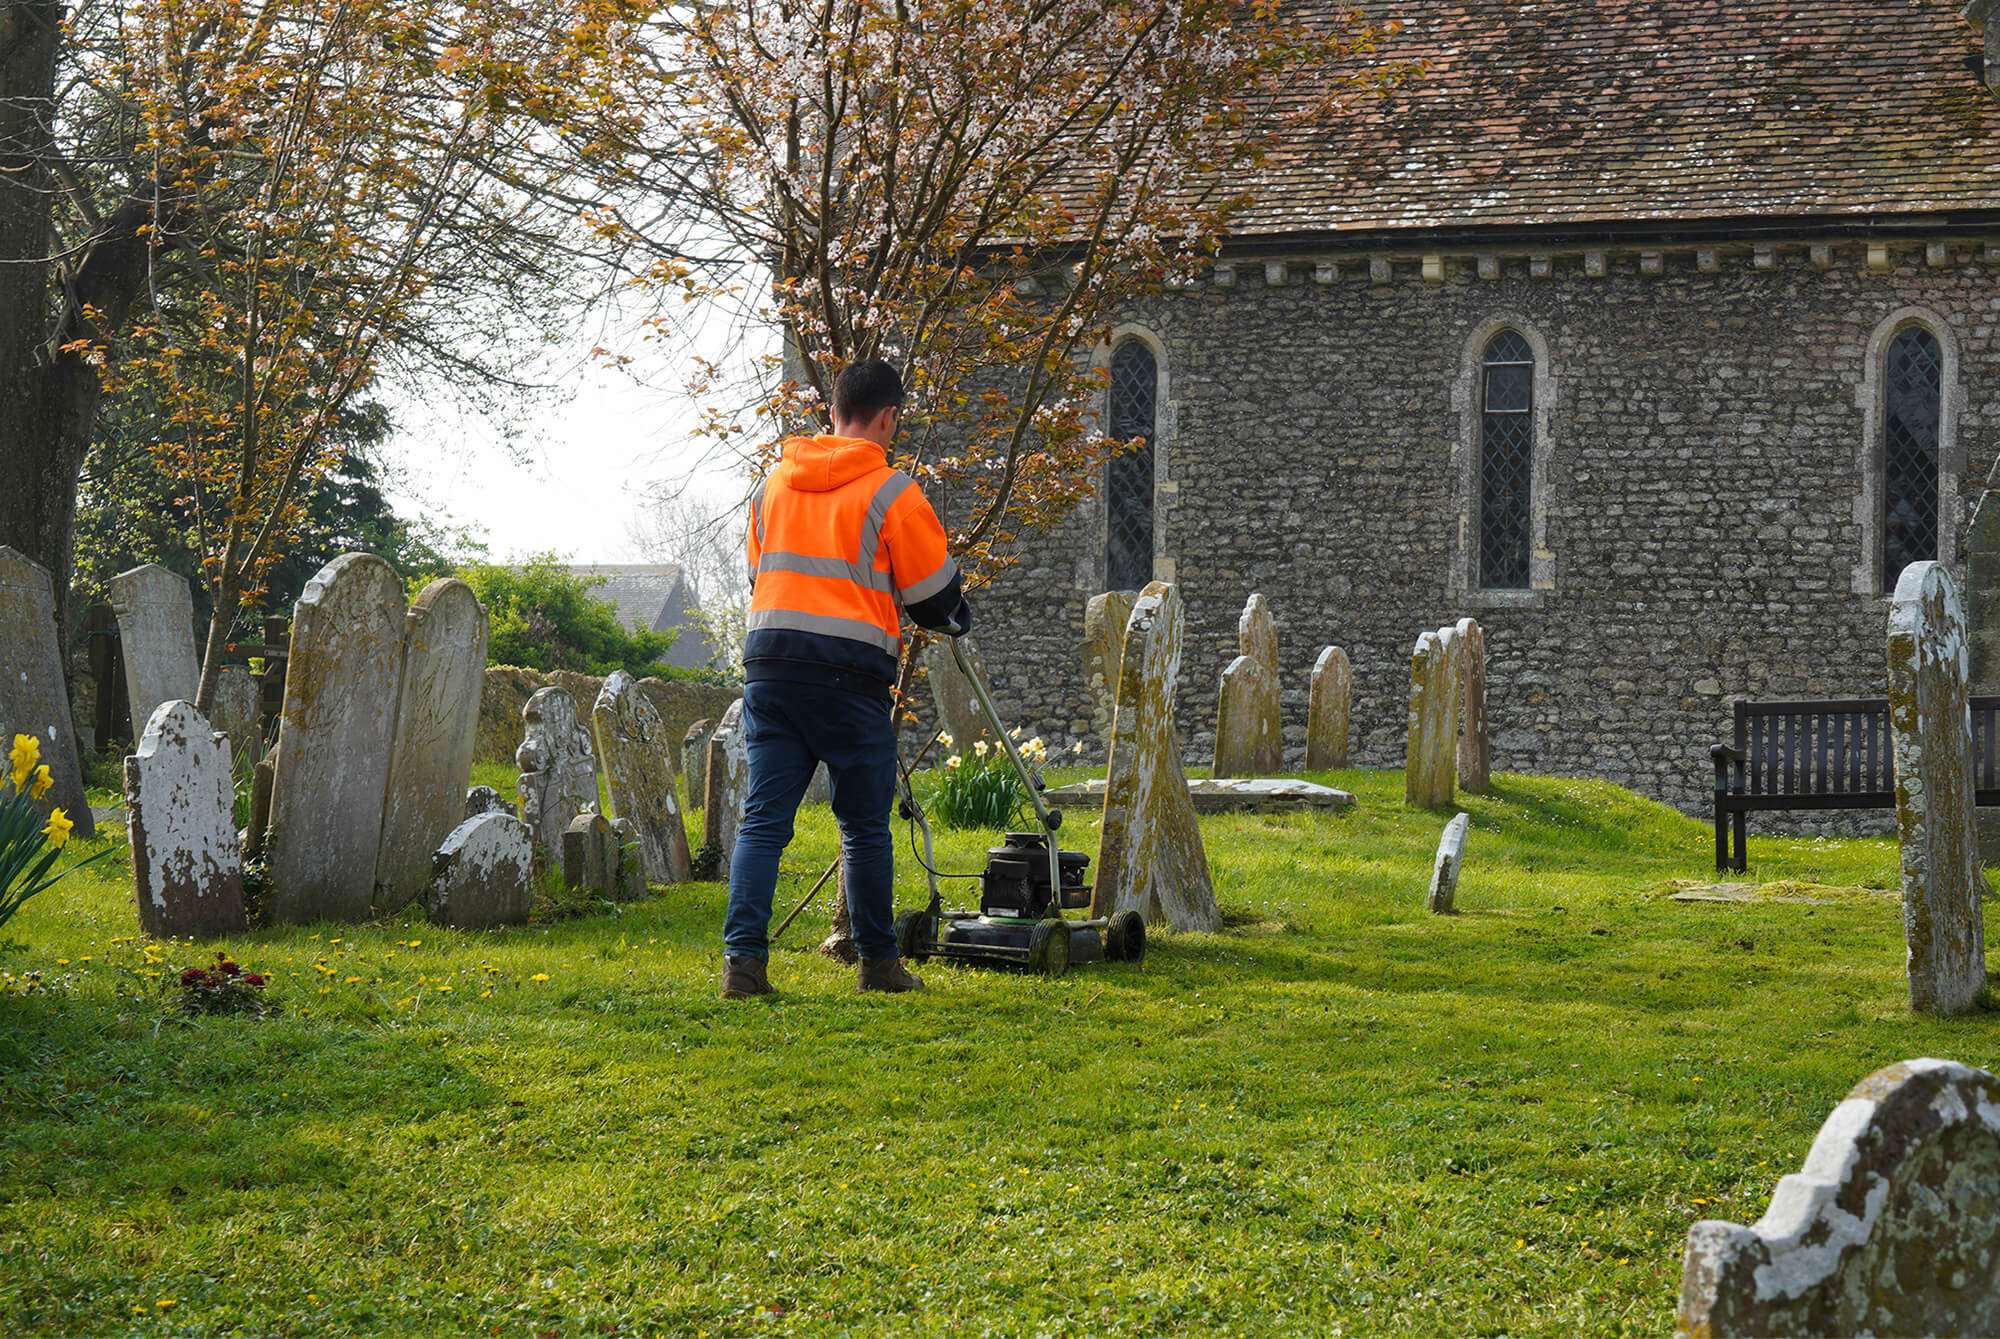 Person wearing high-visibility jacket mowing grass in a grave yard, with grave stones around and part of the church in the background